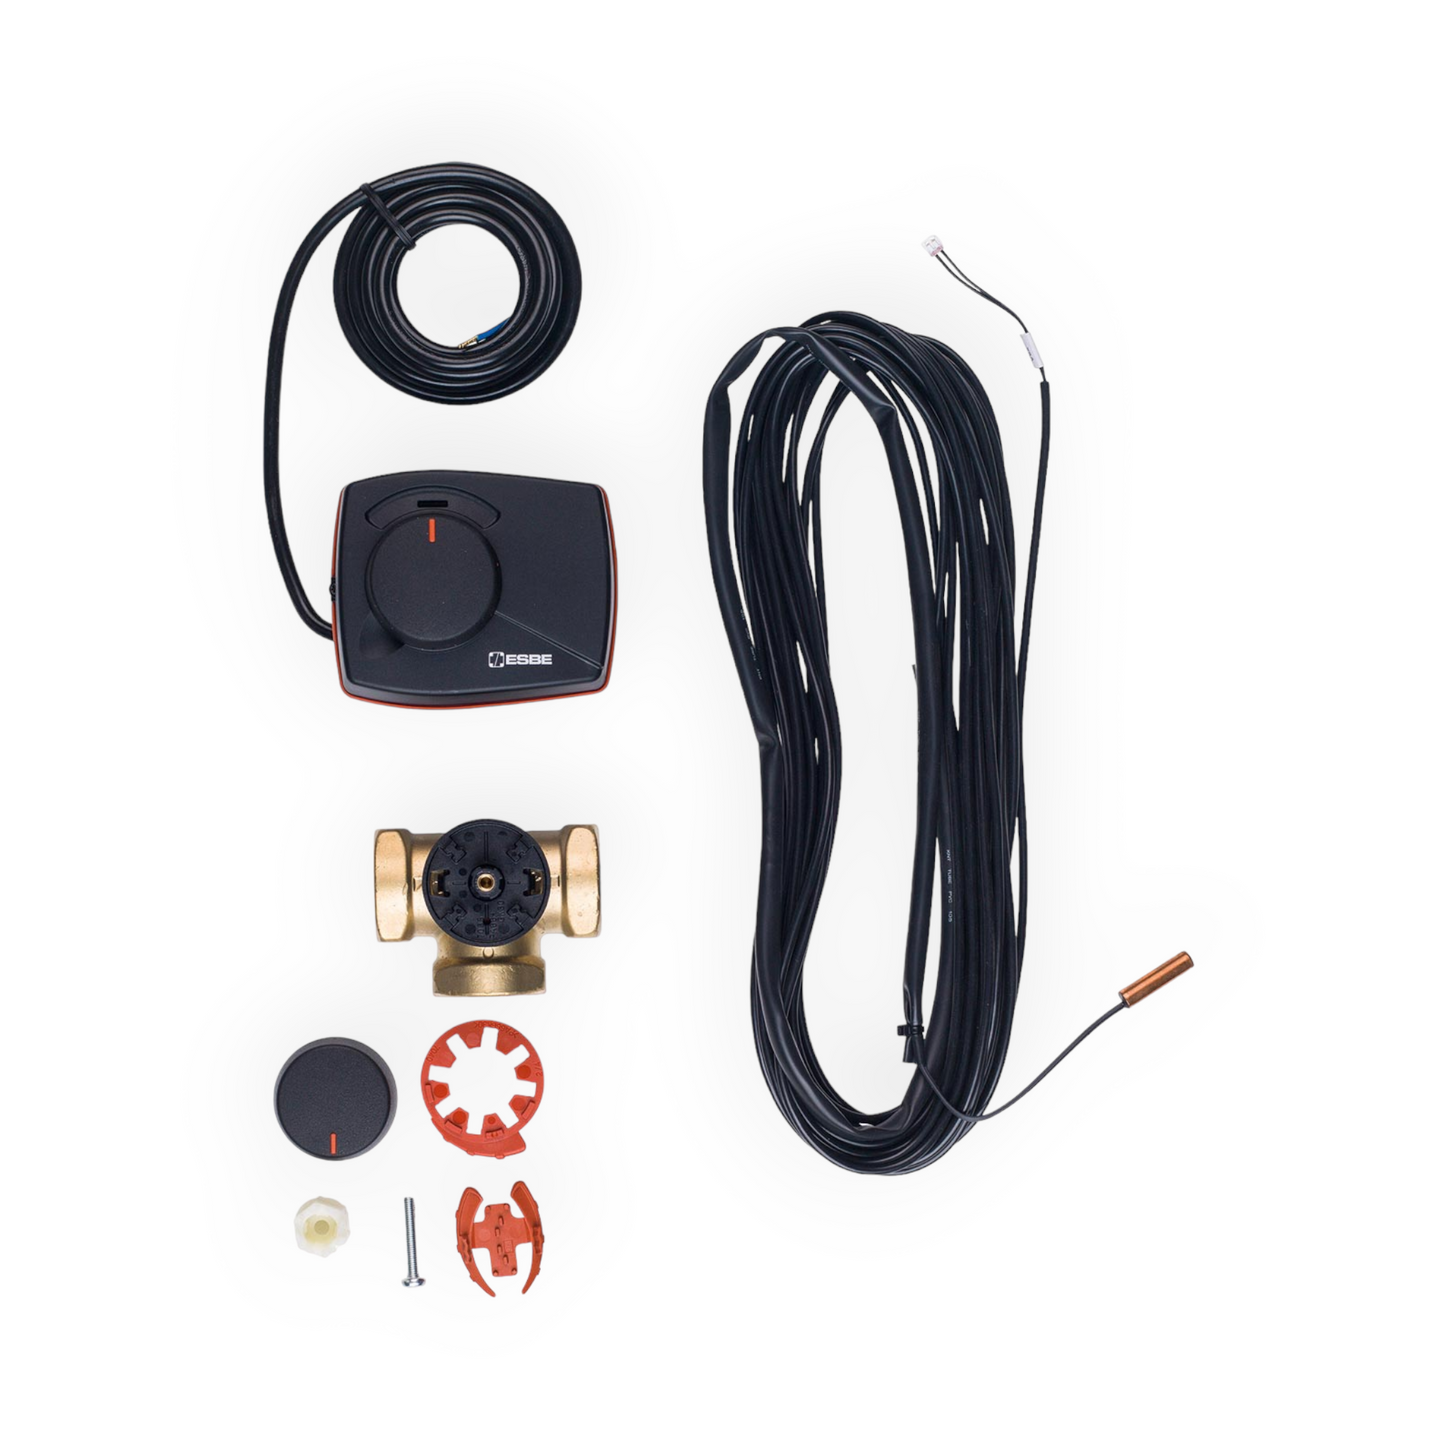 Daikin 3rd Party Hot Water Tank Connection Kit